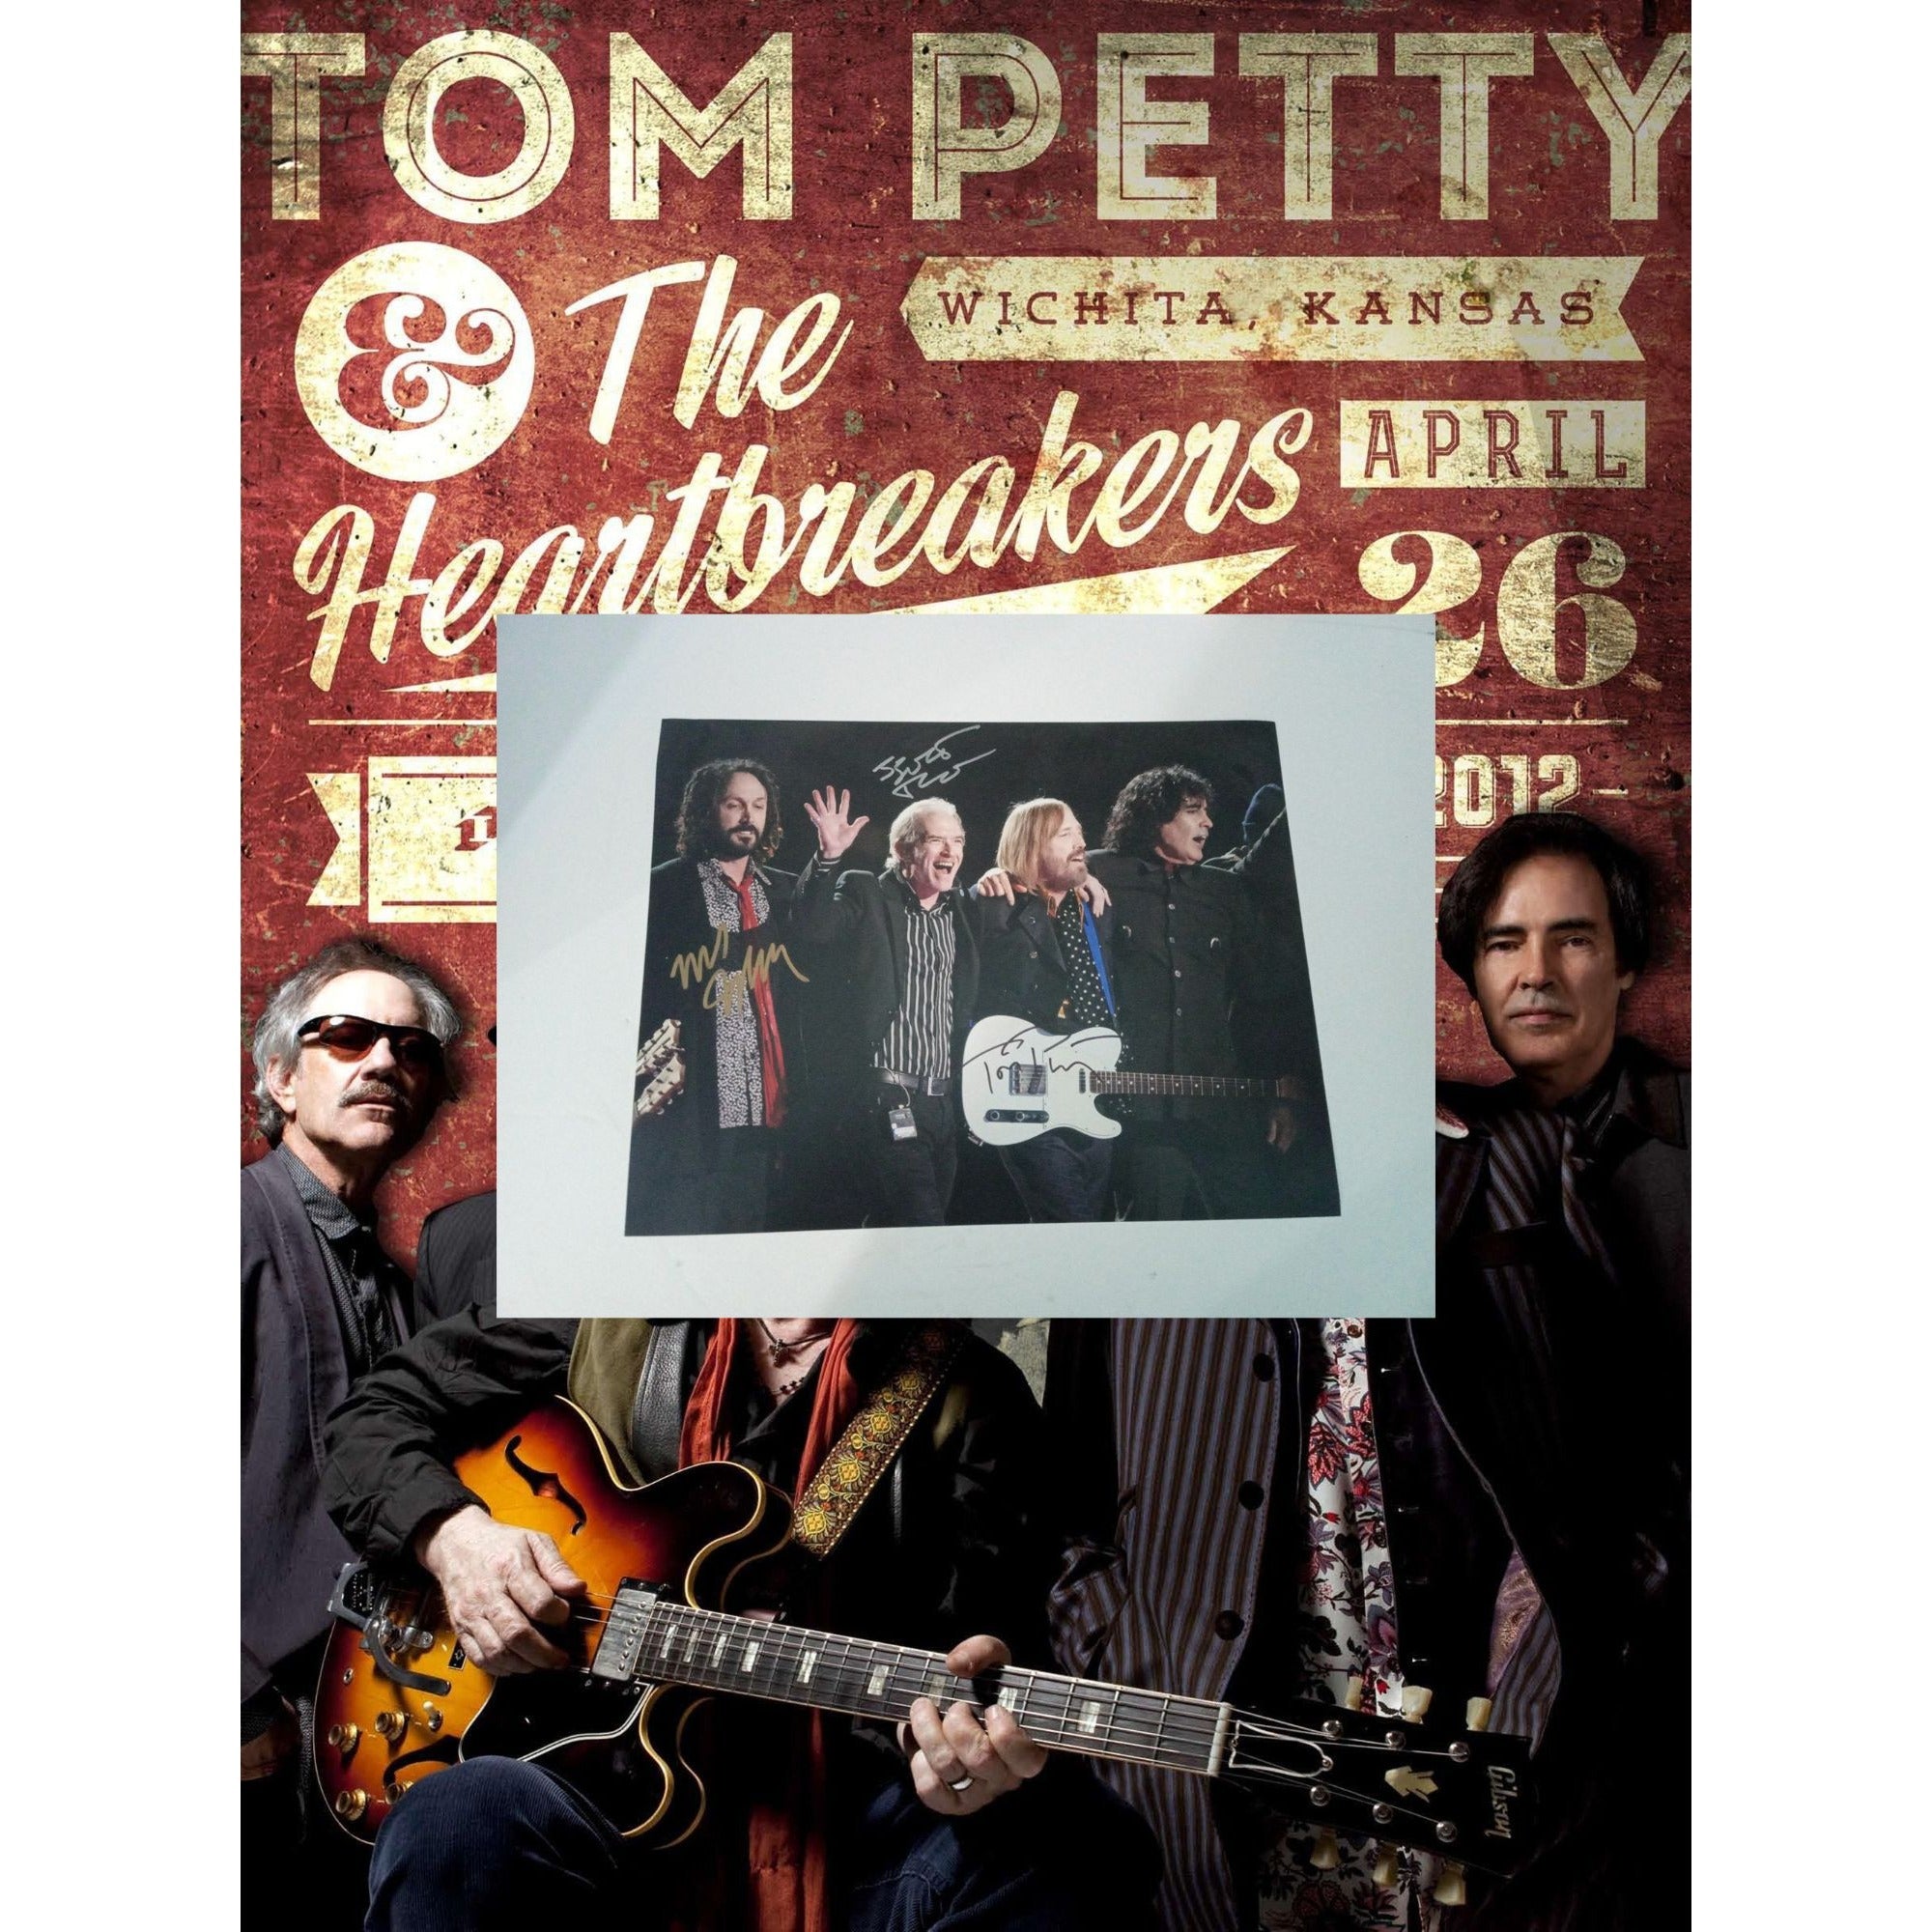 Tom Petty and the Heartbreakers signed 11 by 14 photo with proof